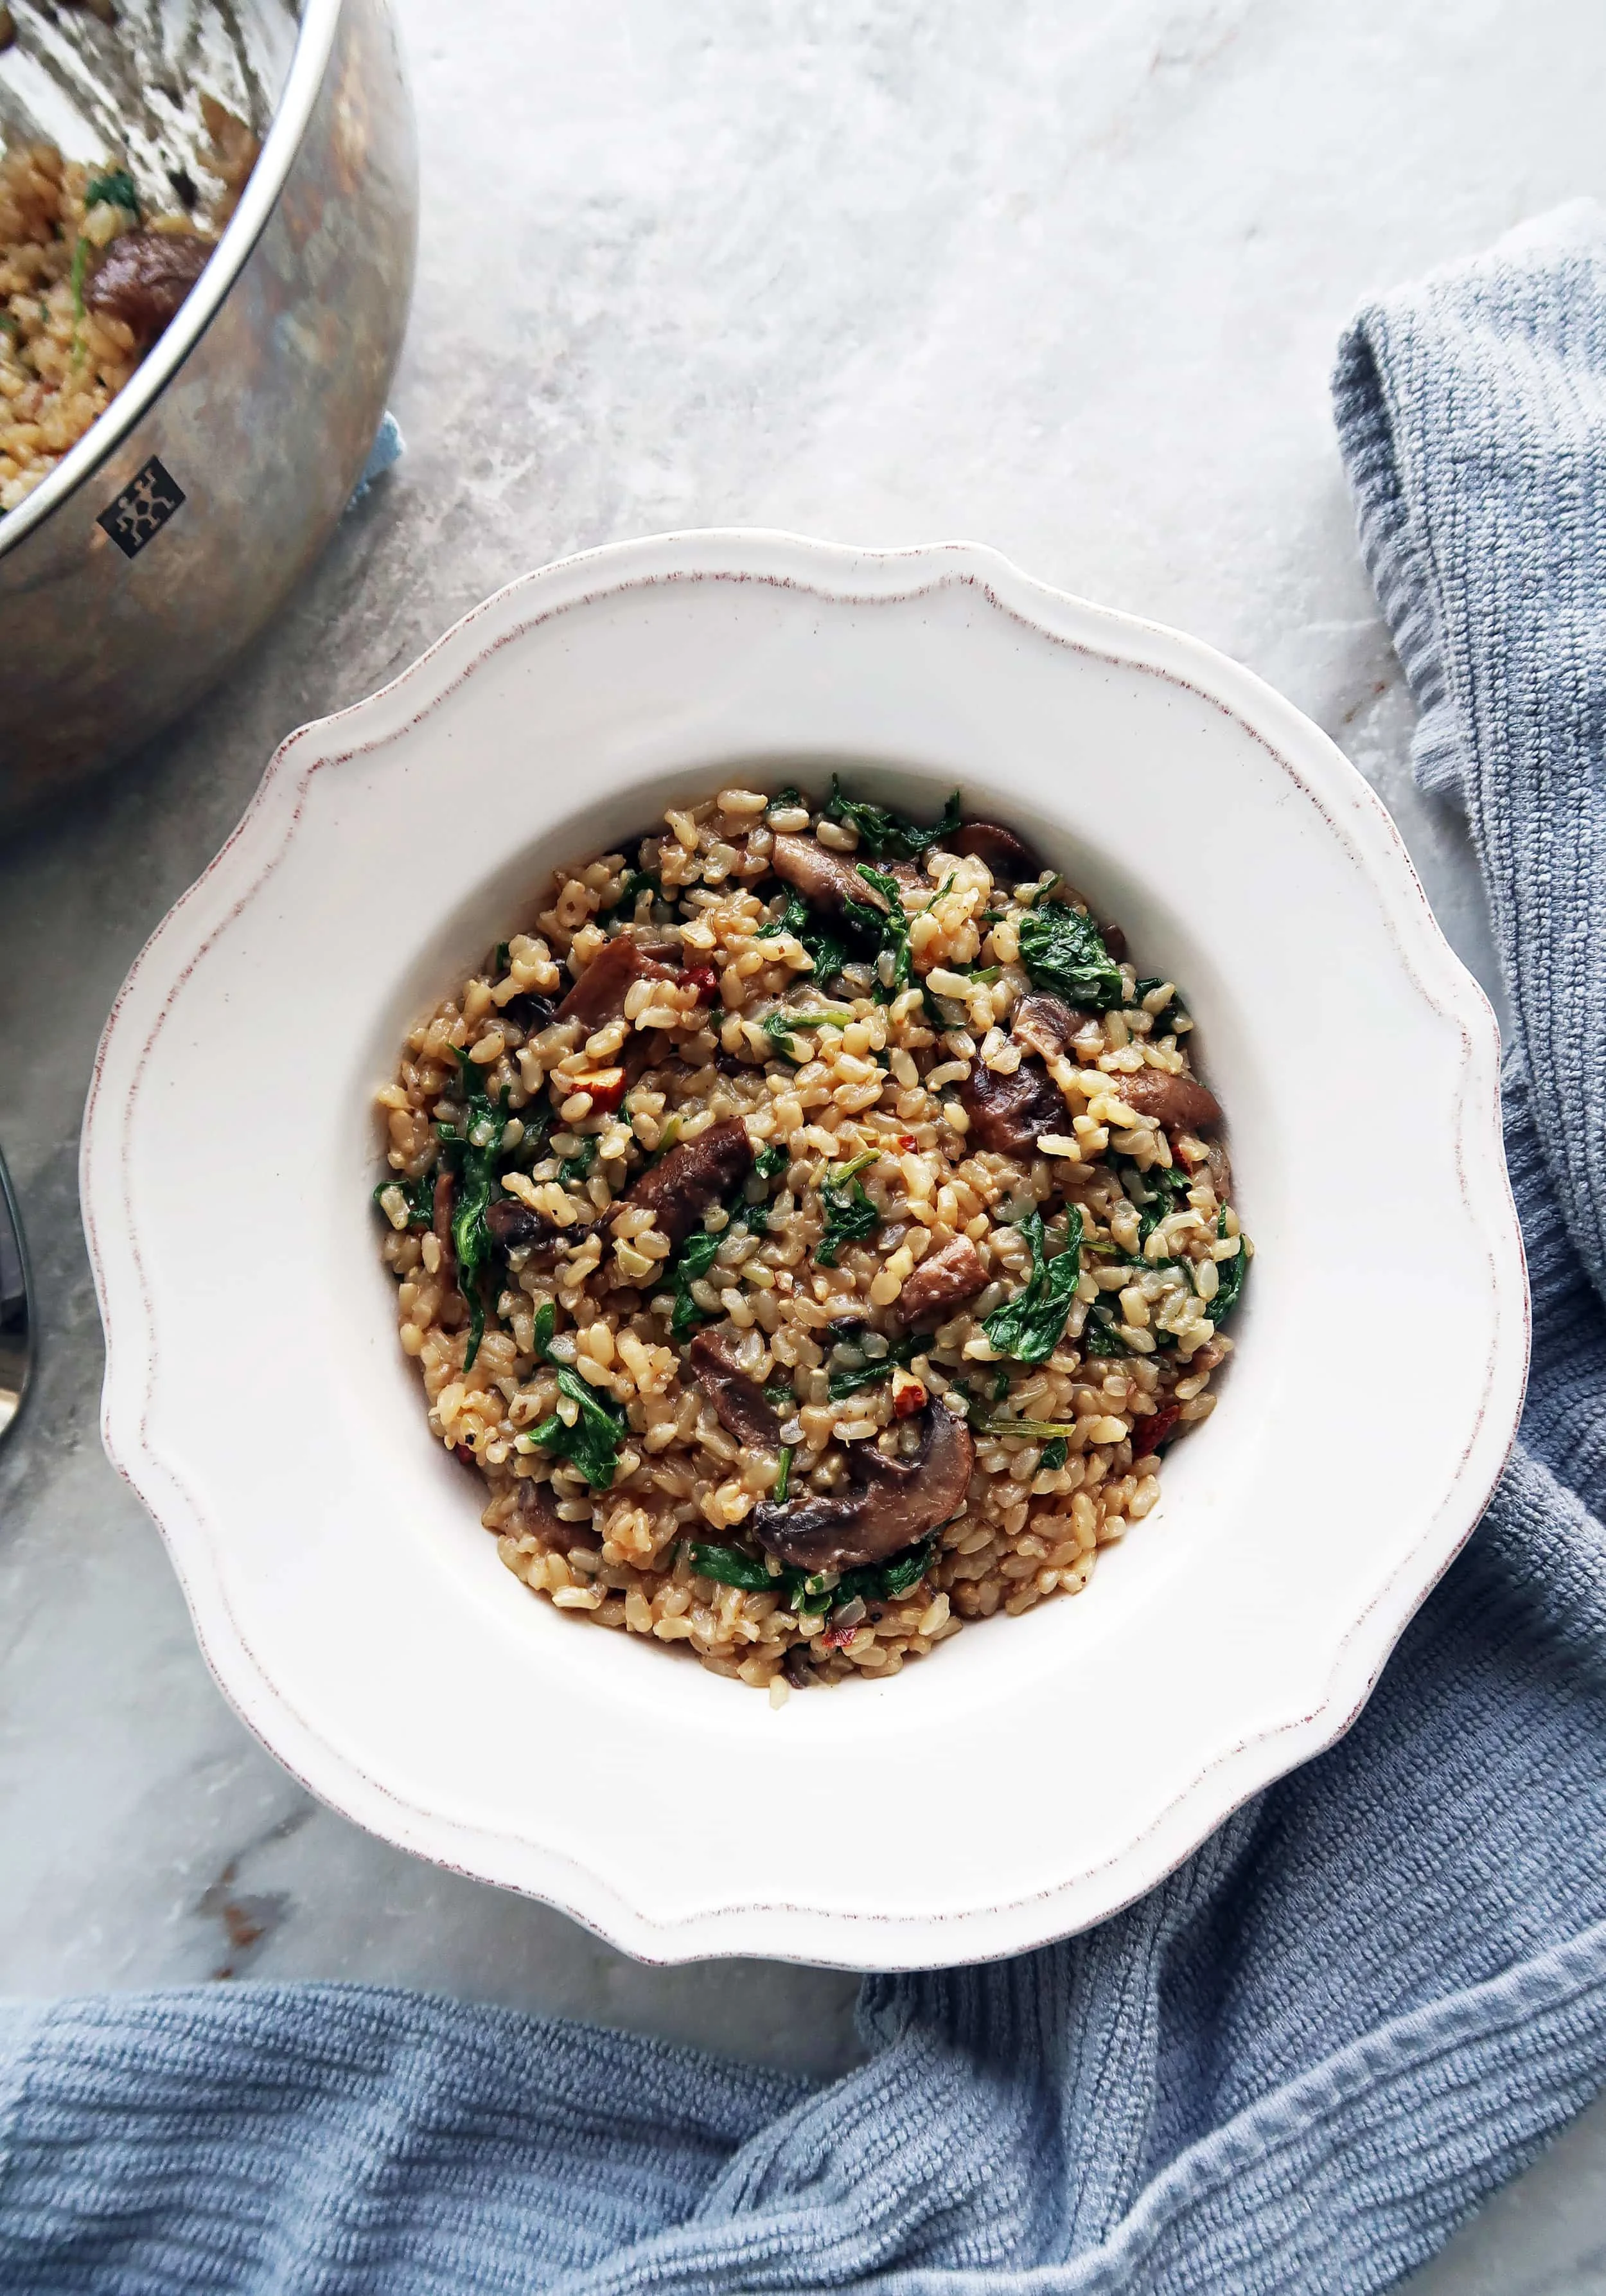 A bowl of Brown Rice Pilaf with Mushrooms, Kale, and Almonds